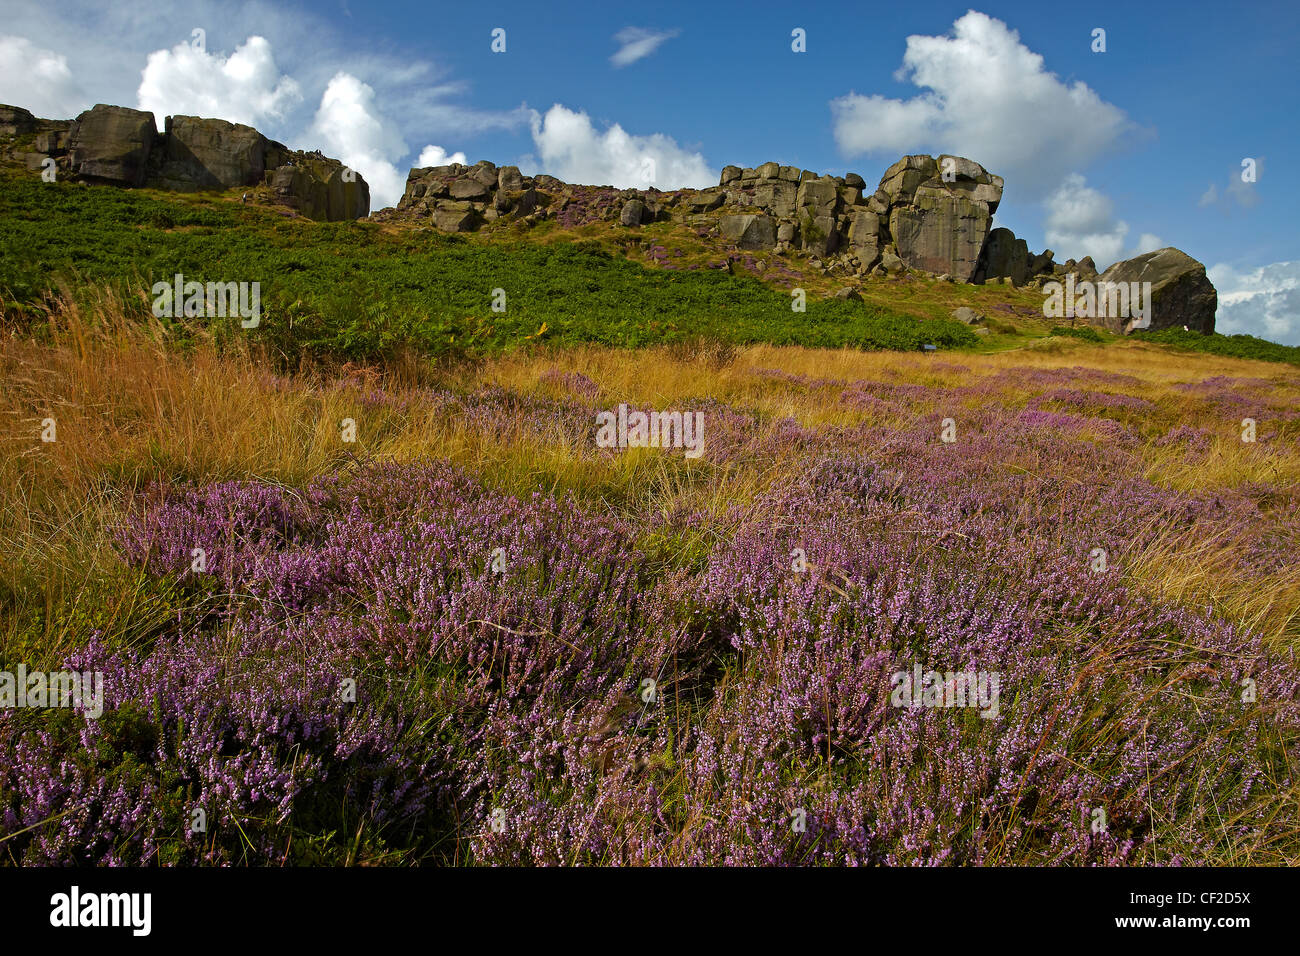 The Cow and Calf, a large rock formation consisting of an outcrop and boulder, also known as Hangingstone Rocks, at Ilkley Quarr Stock Photo